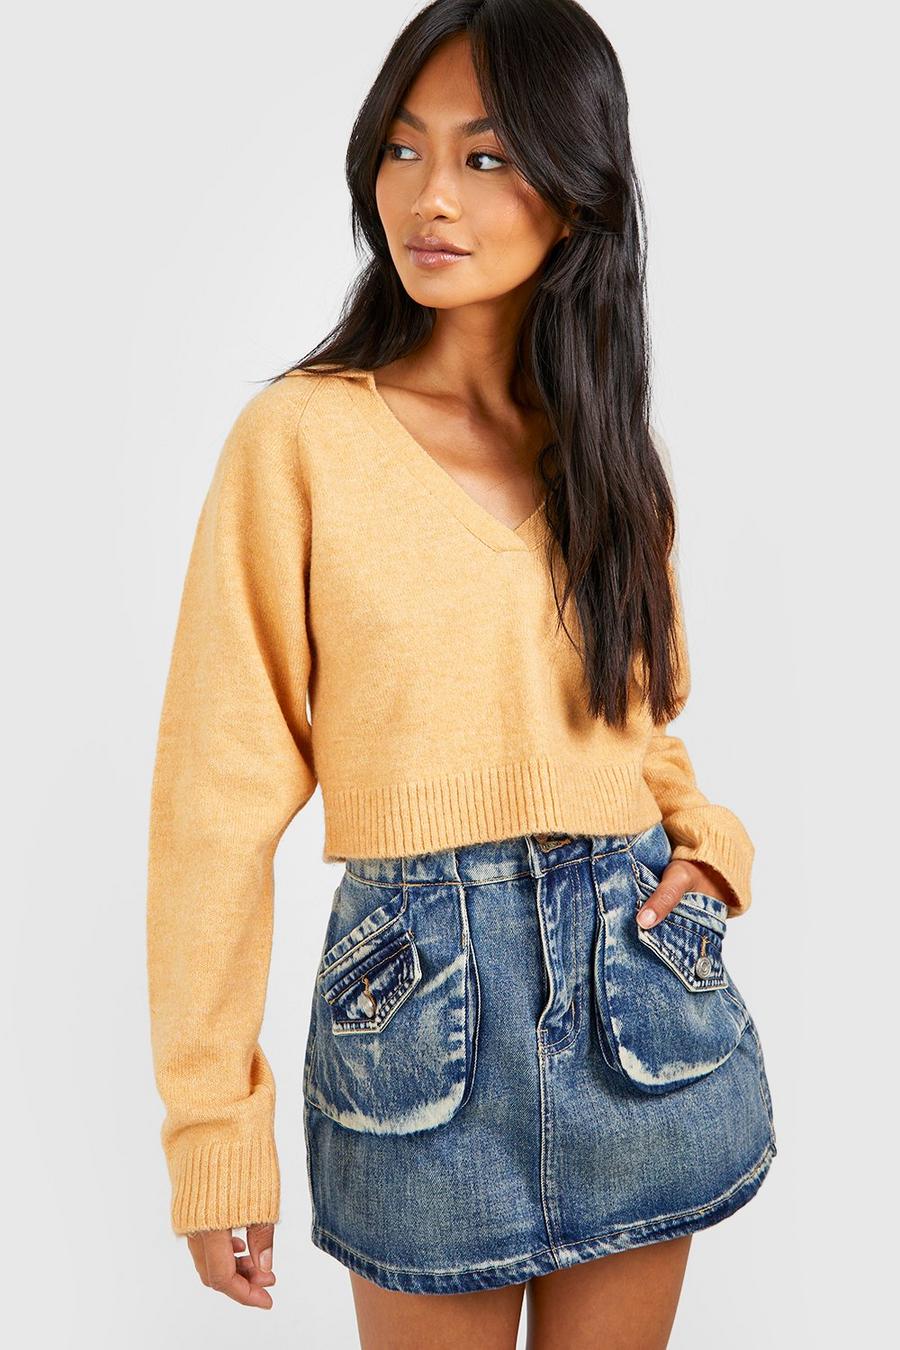 Soft Knit Fine Gauge Cropped Polo Collar Sweater